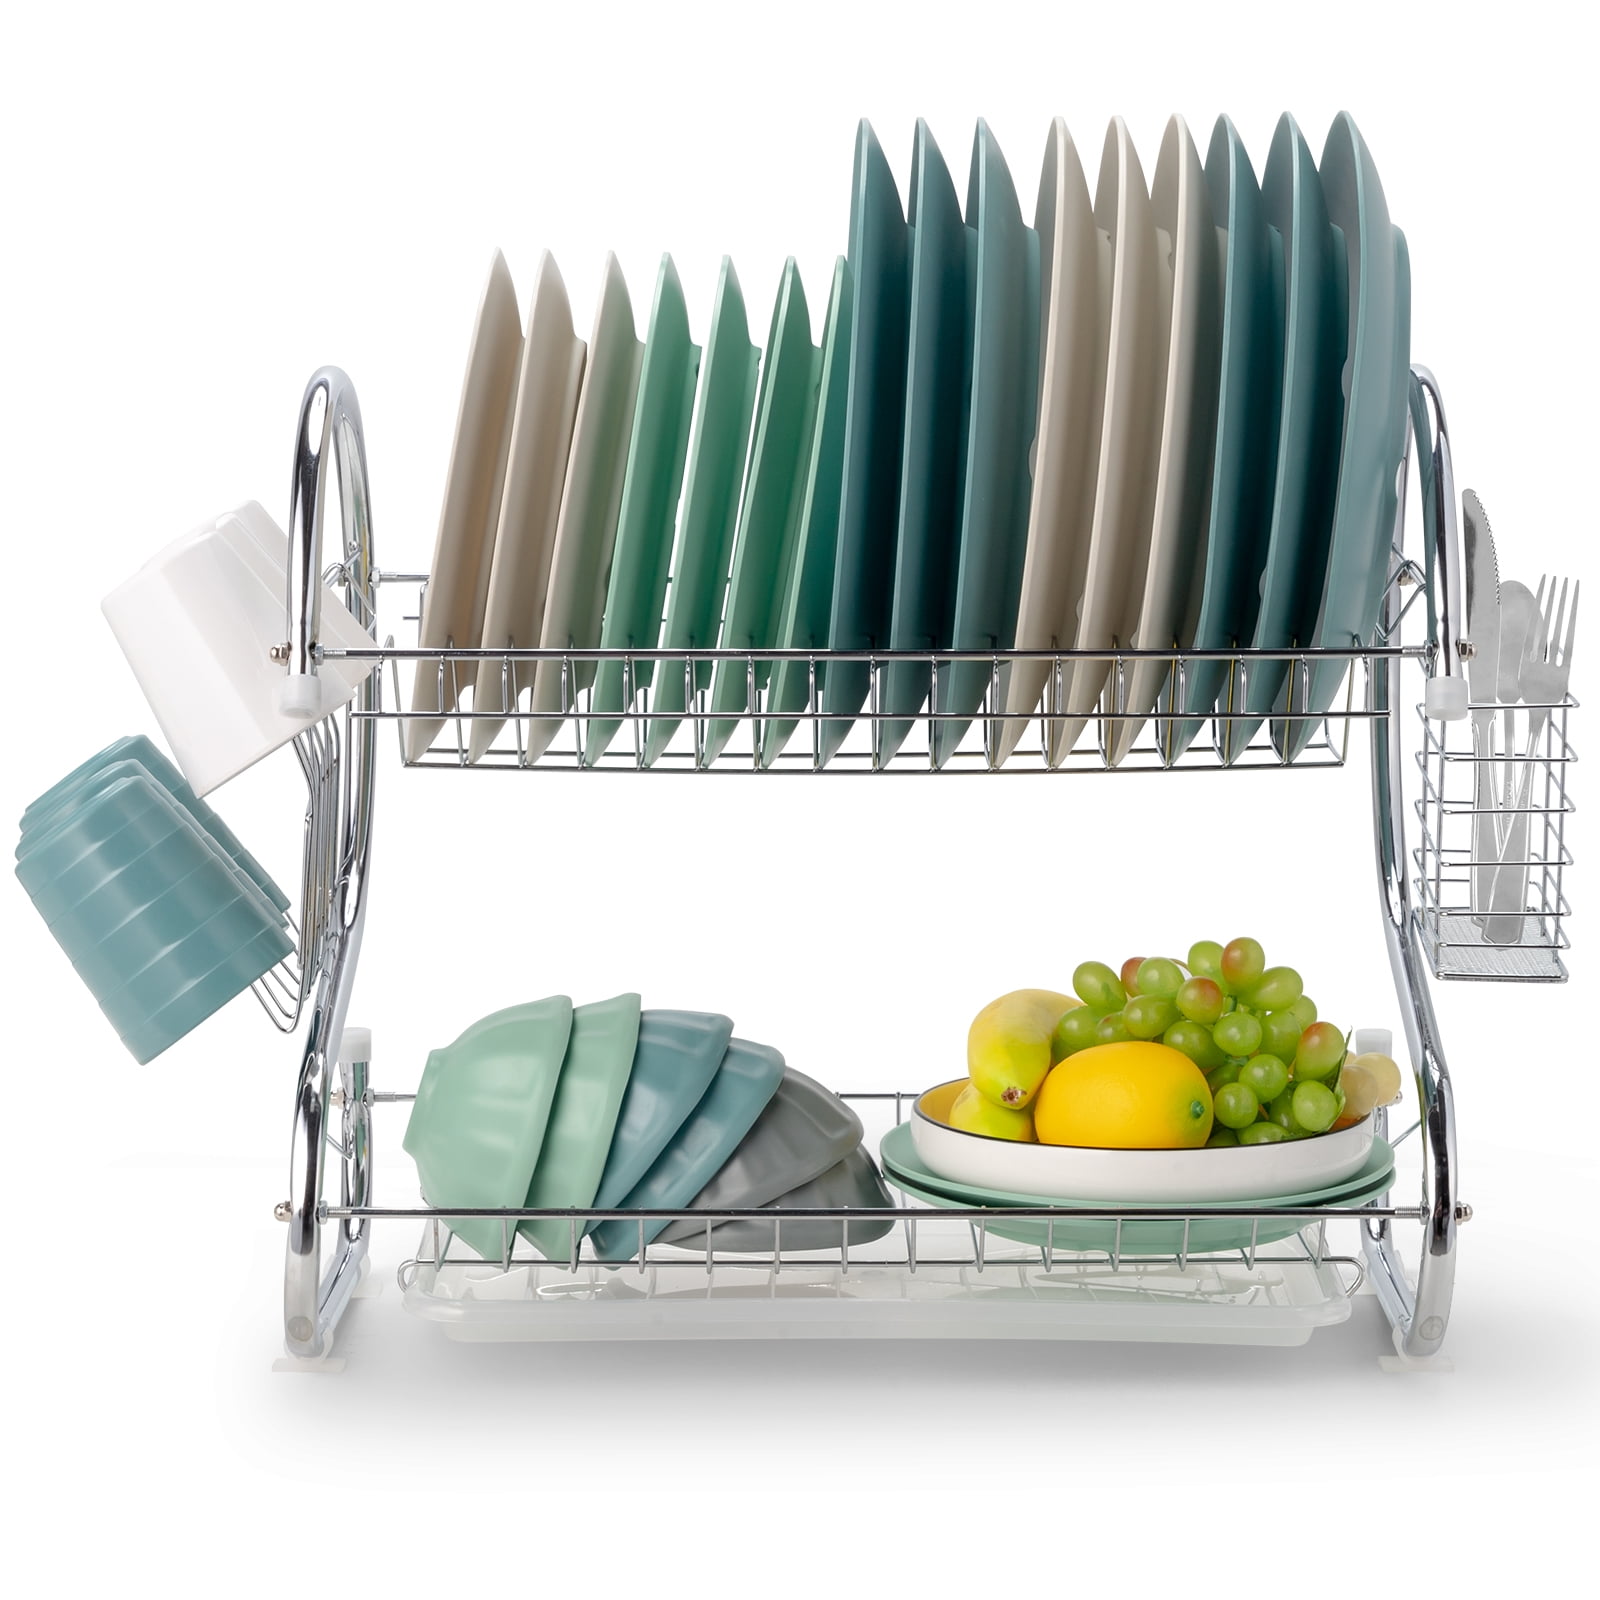 shiok decor Containers Kitchen Rack Iron 2 Tier Dish Drying Rack